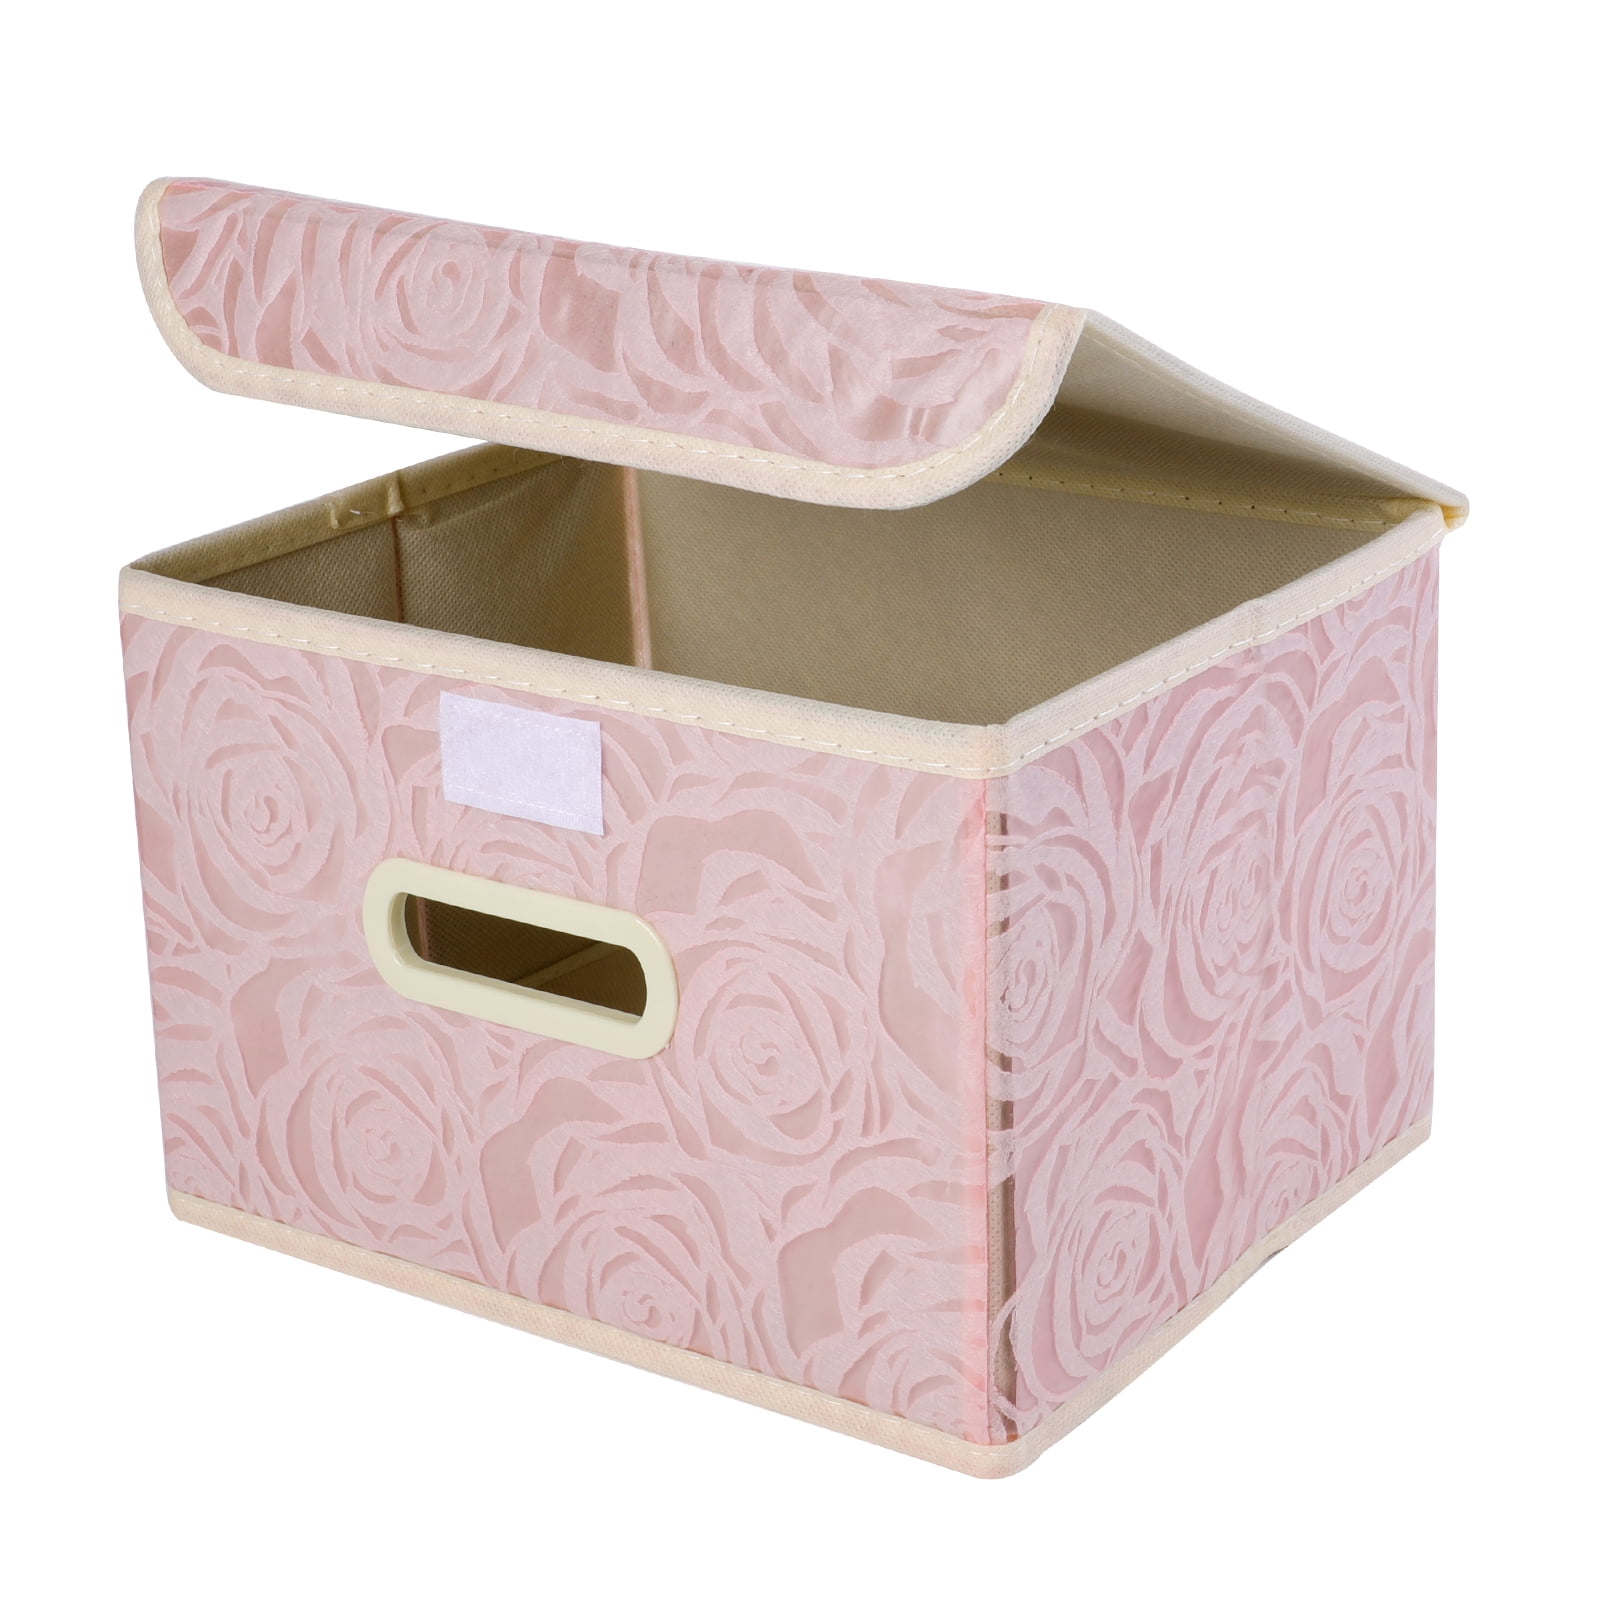 Mei Flowers Chinoiserie Style Storage Bins with Lids for Organizing Lidded  Home Storage Bins with Handles Oxford Cloth Storage Cube Box for Room